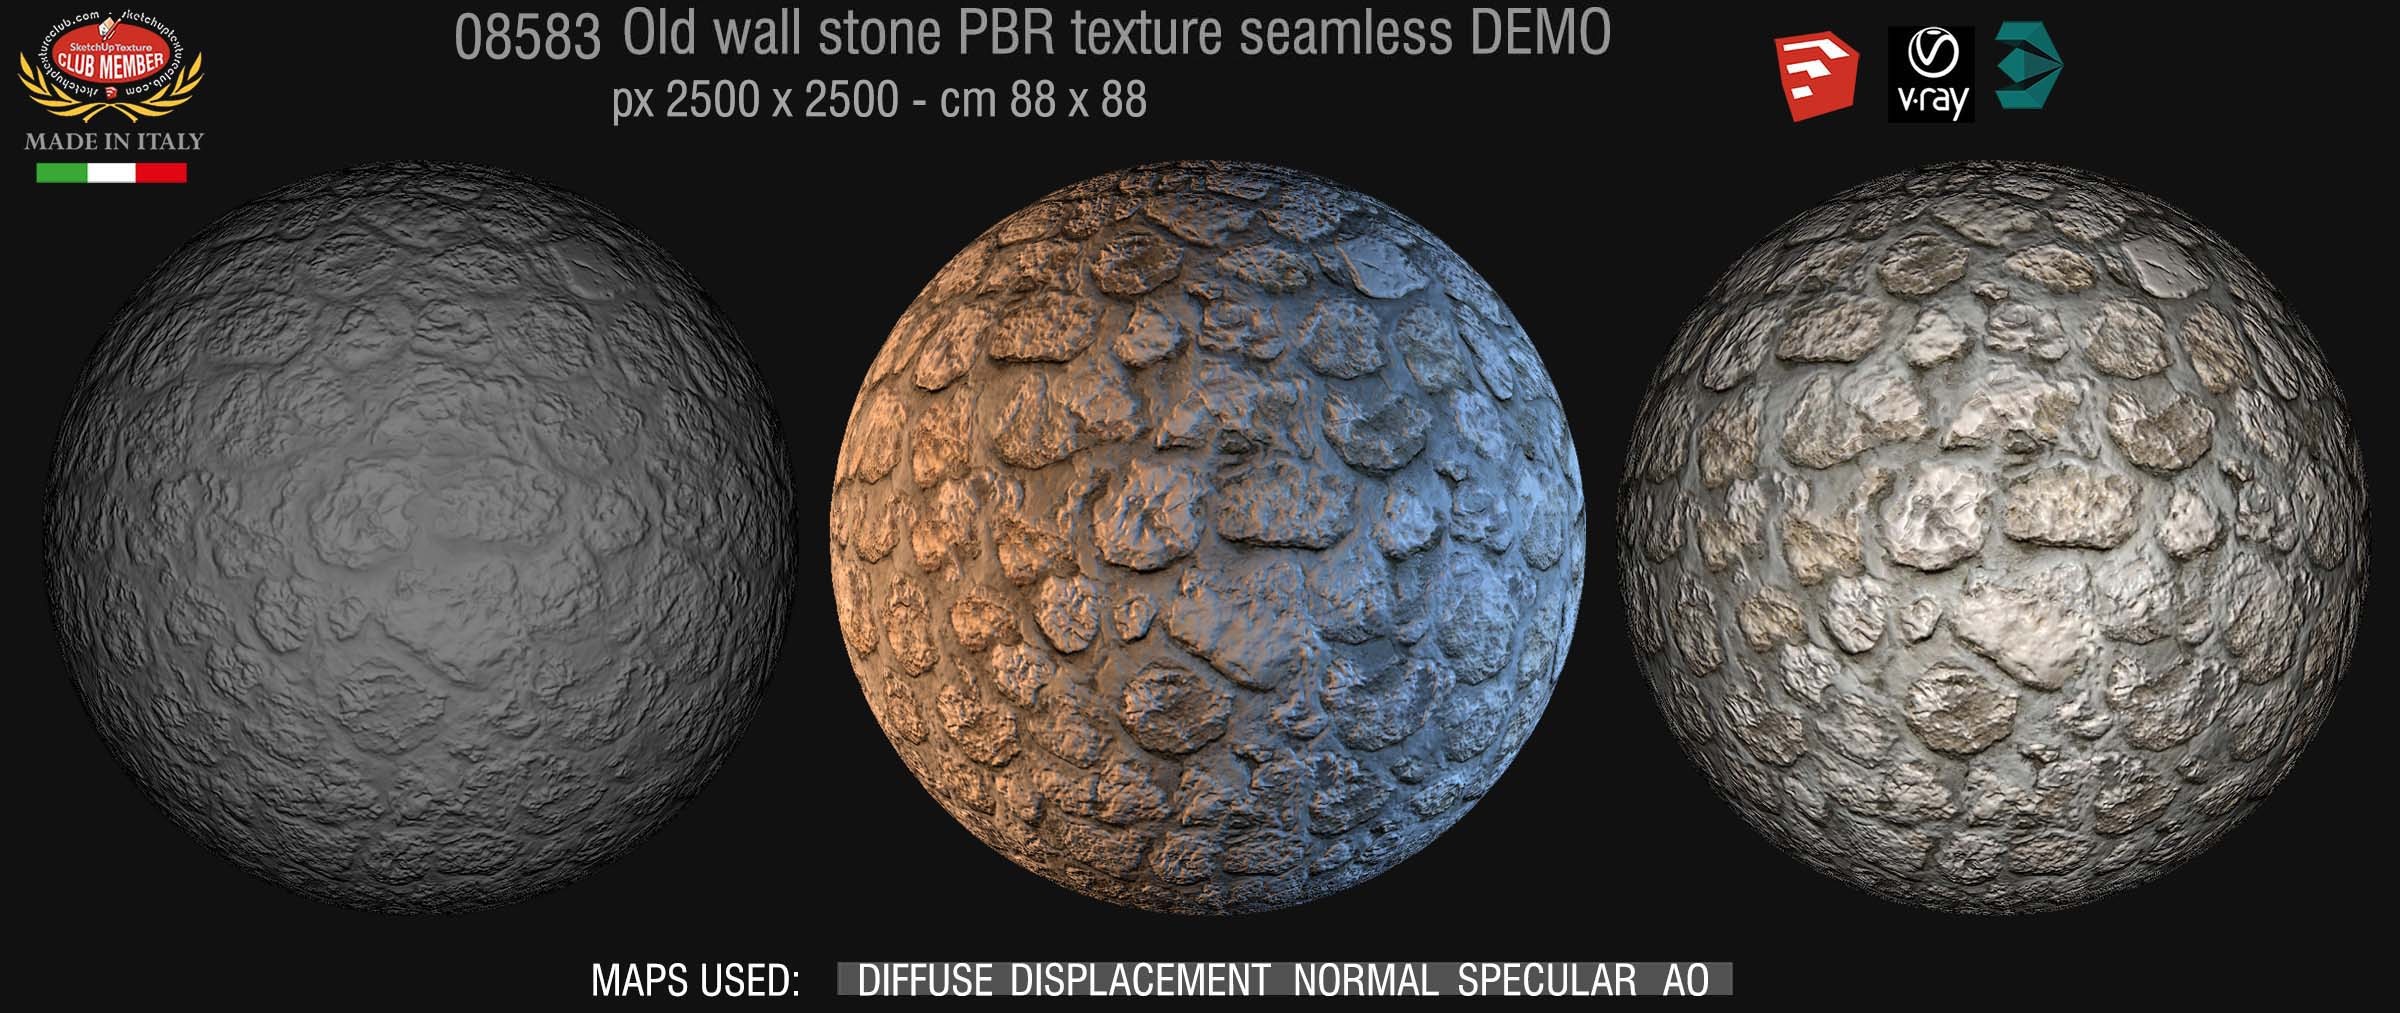 08583 Old wall stone PBR texture seamless DEMO